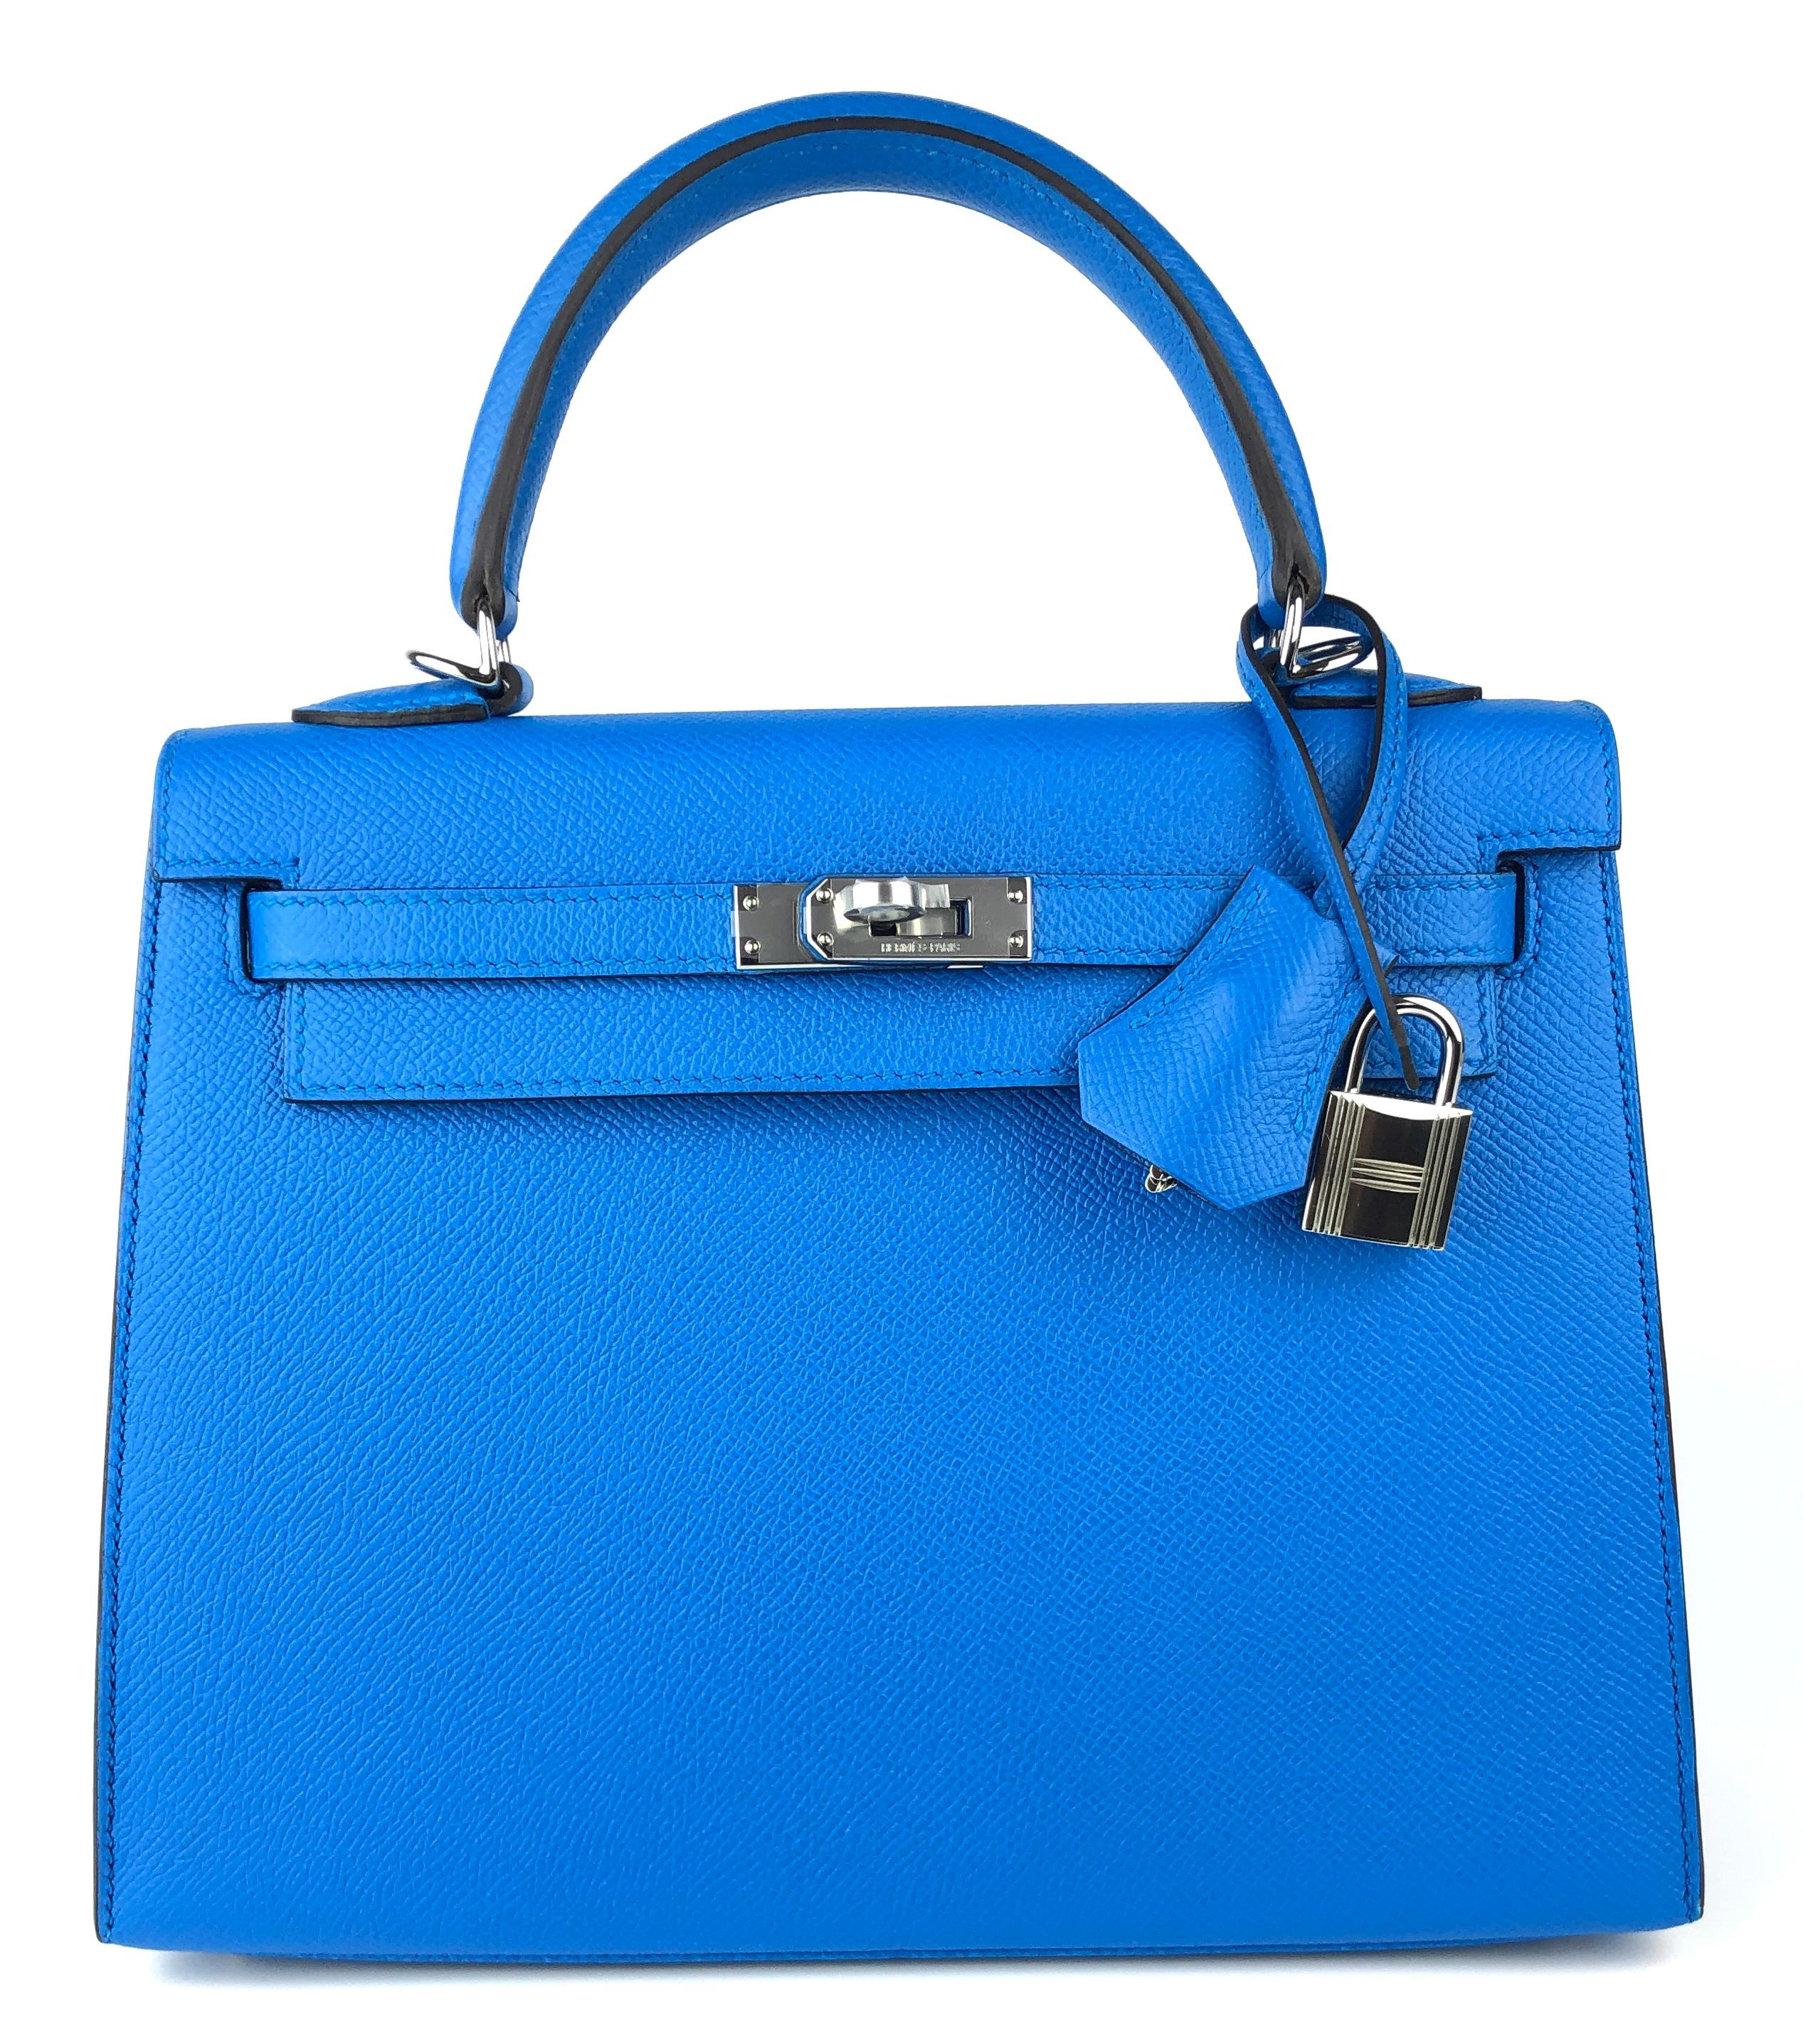 Beautiful Hermes Kelly 25 Sellier Blue Zanzibar Epsom Leather. Complimented by Palladium Hardware. Pristine Condition with Plastic on Hardware. 2017 A Stamp. 

Shop with Confidence from Lux. Addicts. Authenticity Guaranteed! 

Please keep in mind